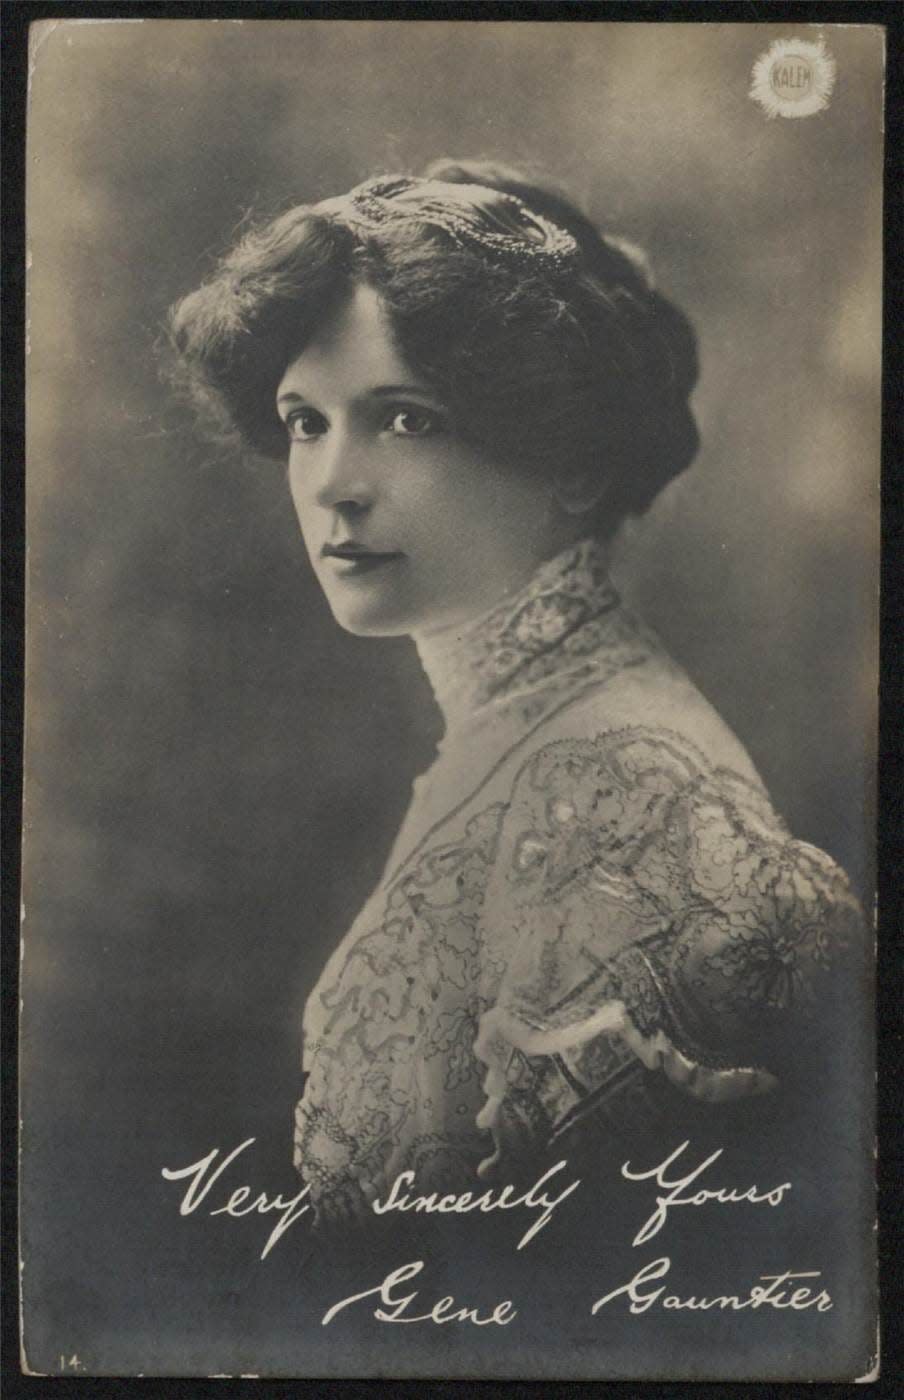 Gene Gauntier, a silent-film actress and screenwriter, was in a New York-based film crew that came to Jacksonville in 1908.